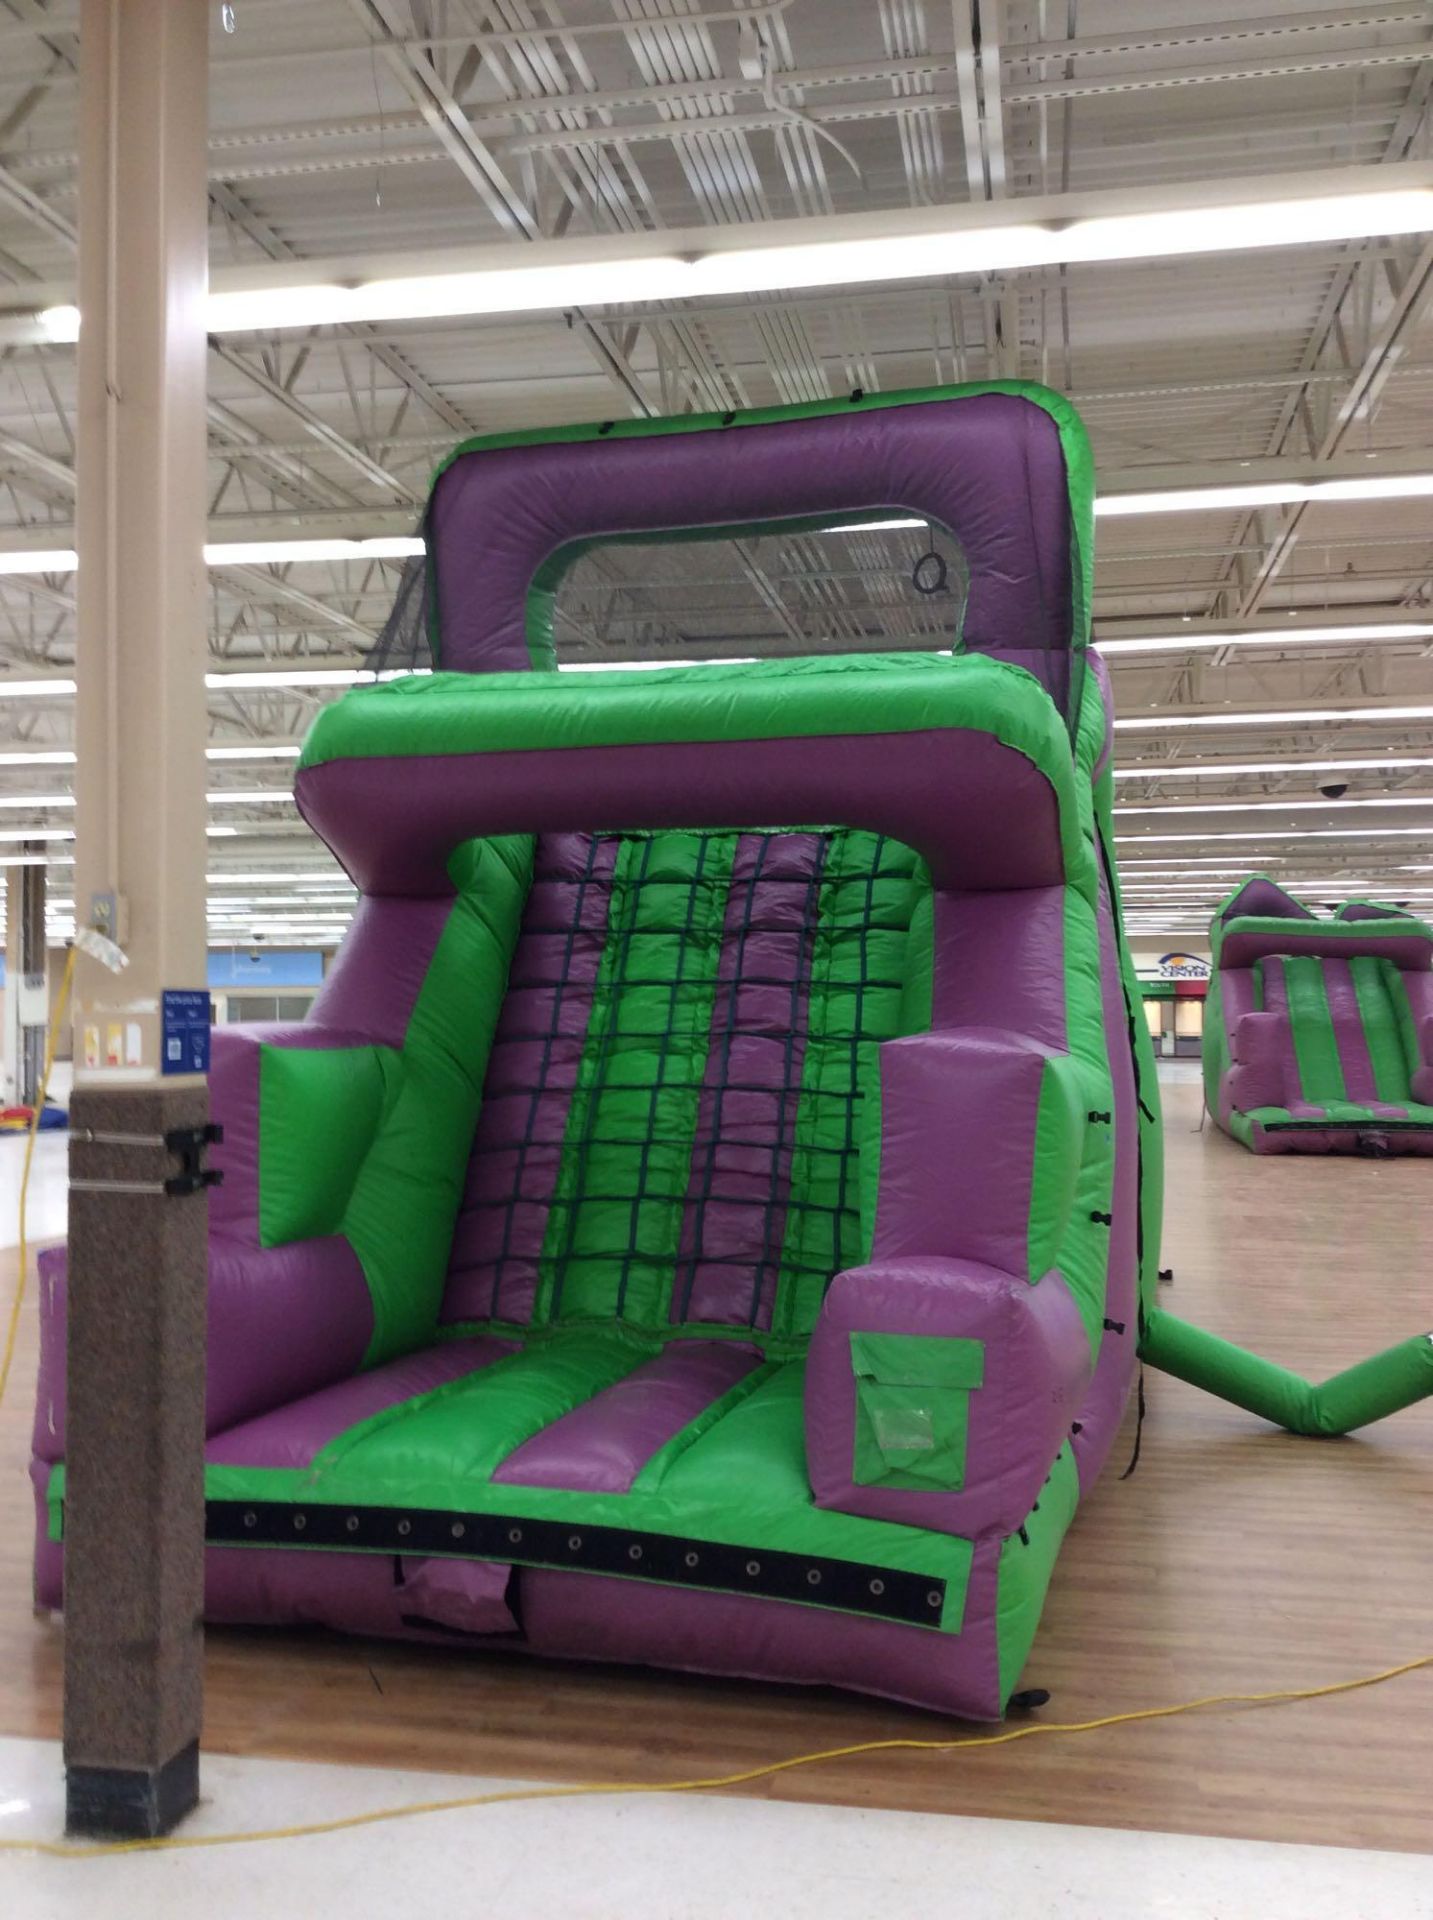 10' x25' inflatable purple and green slide with blower. Can be used in conjunction with lot 217, - Image 3 of 3